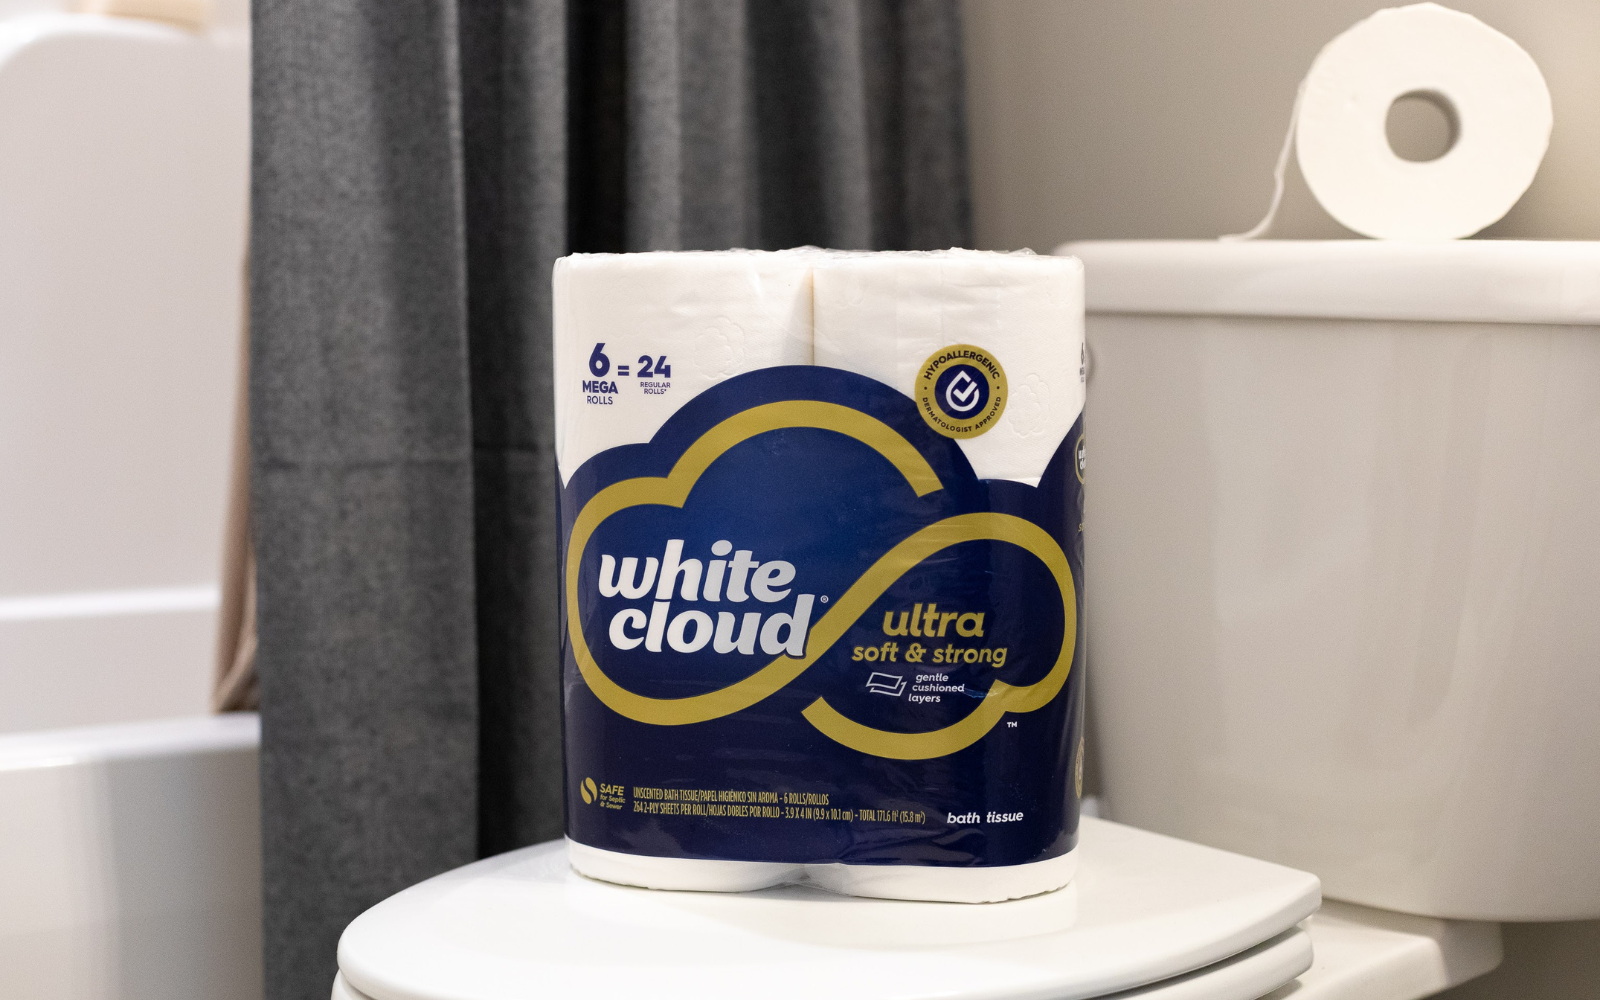 Get Your Home Ready For Spring Celebrations – Stock Up On White Cloud® Ultra Soft & Strong Bath Tissue & Save At Publix